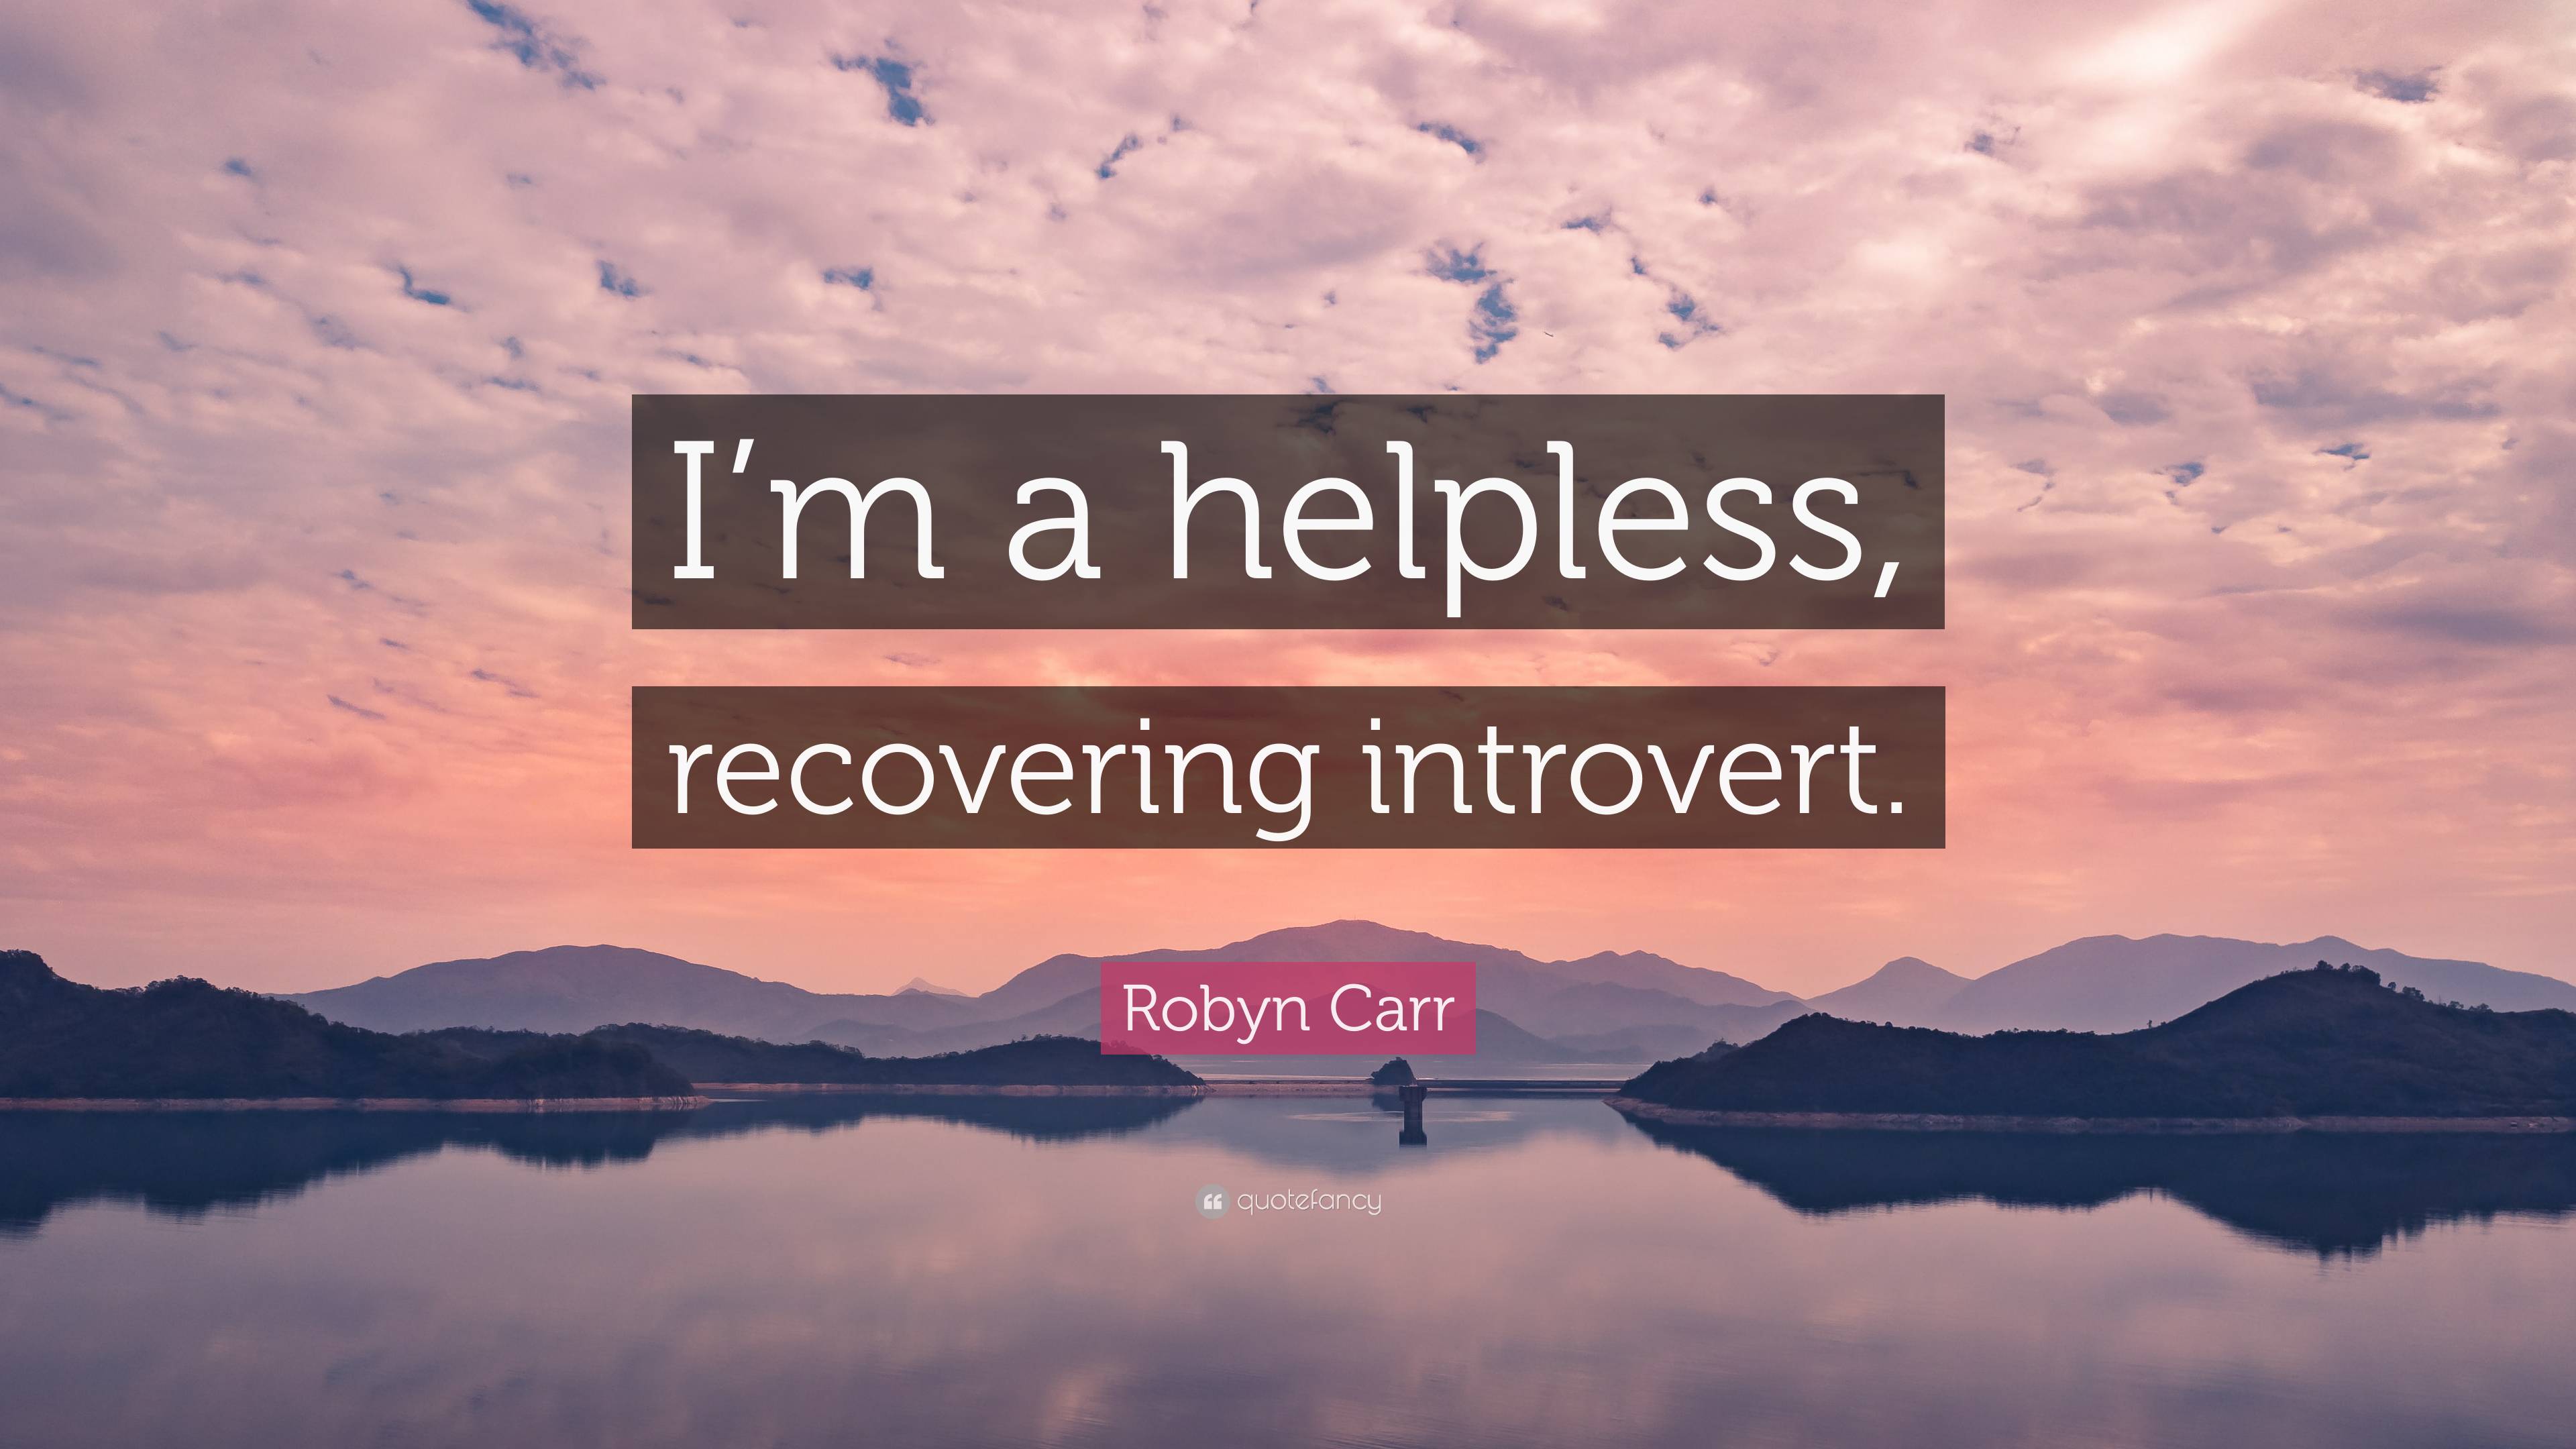 Robyn Carr Quote: “I'm a helpless, recovering introvert.”